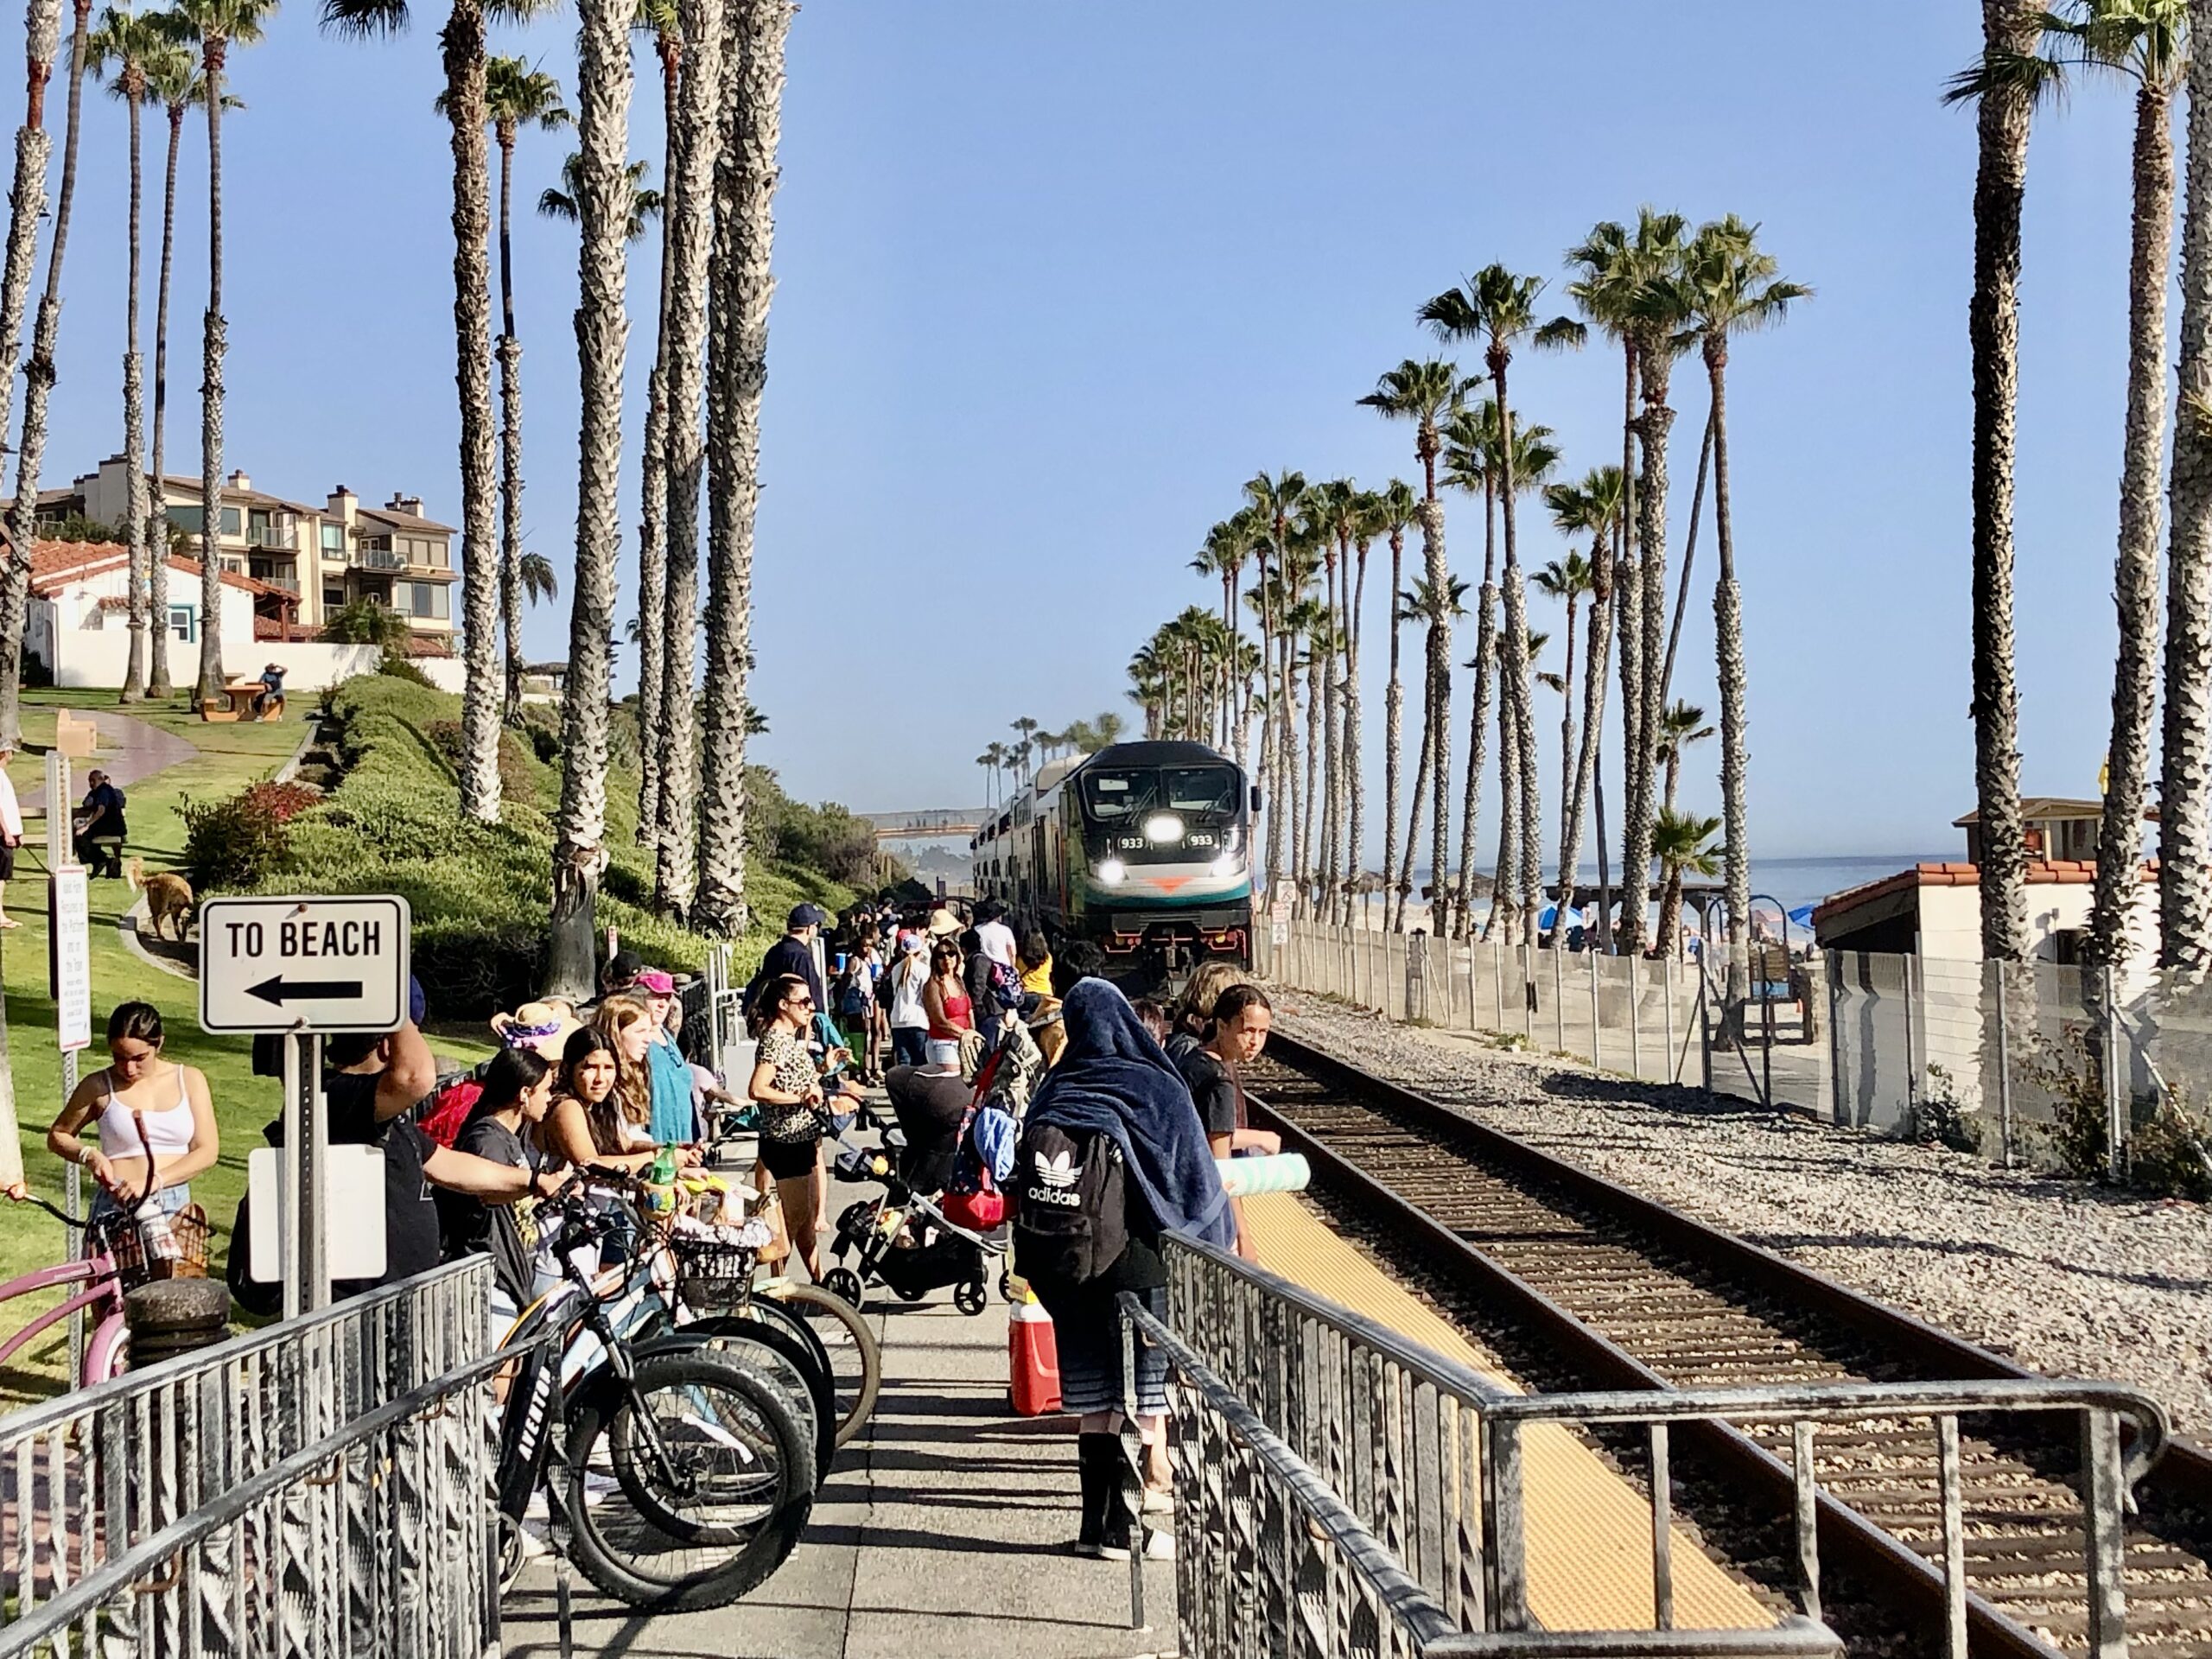 Voice of OC publishes RailPAC op-ed in support of Serra Siding Extension project in Dana Point